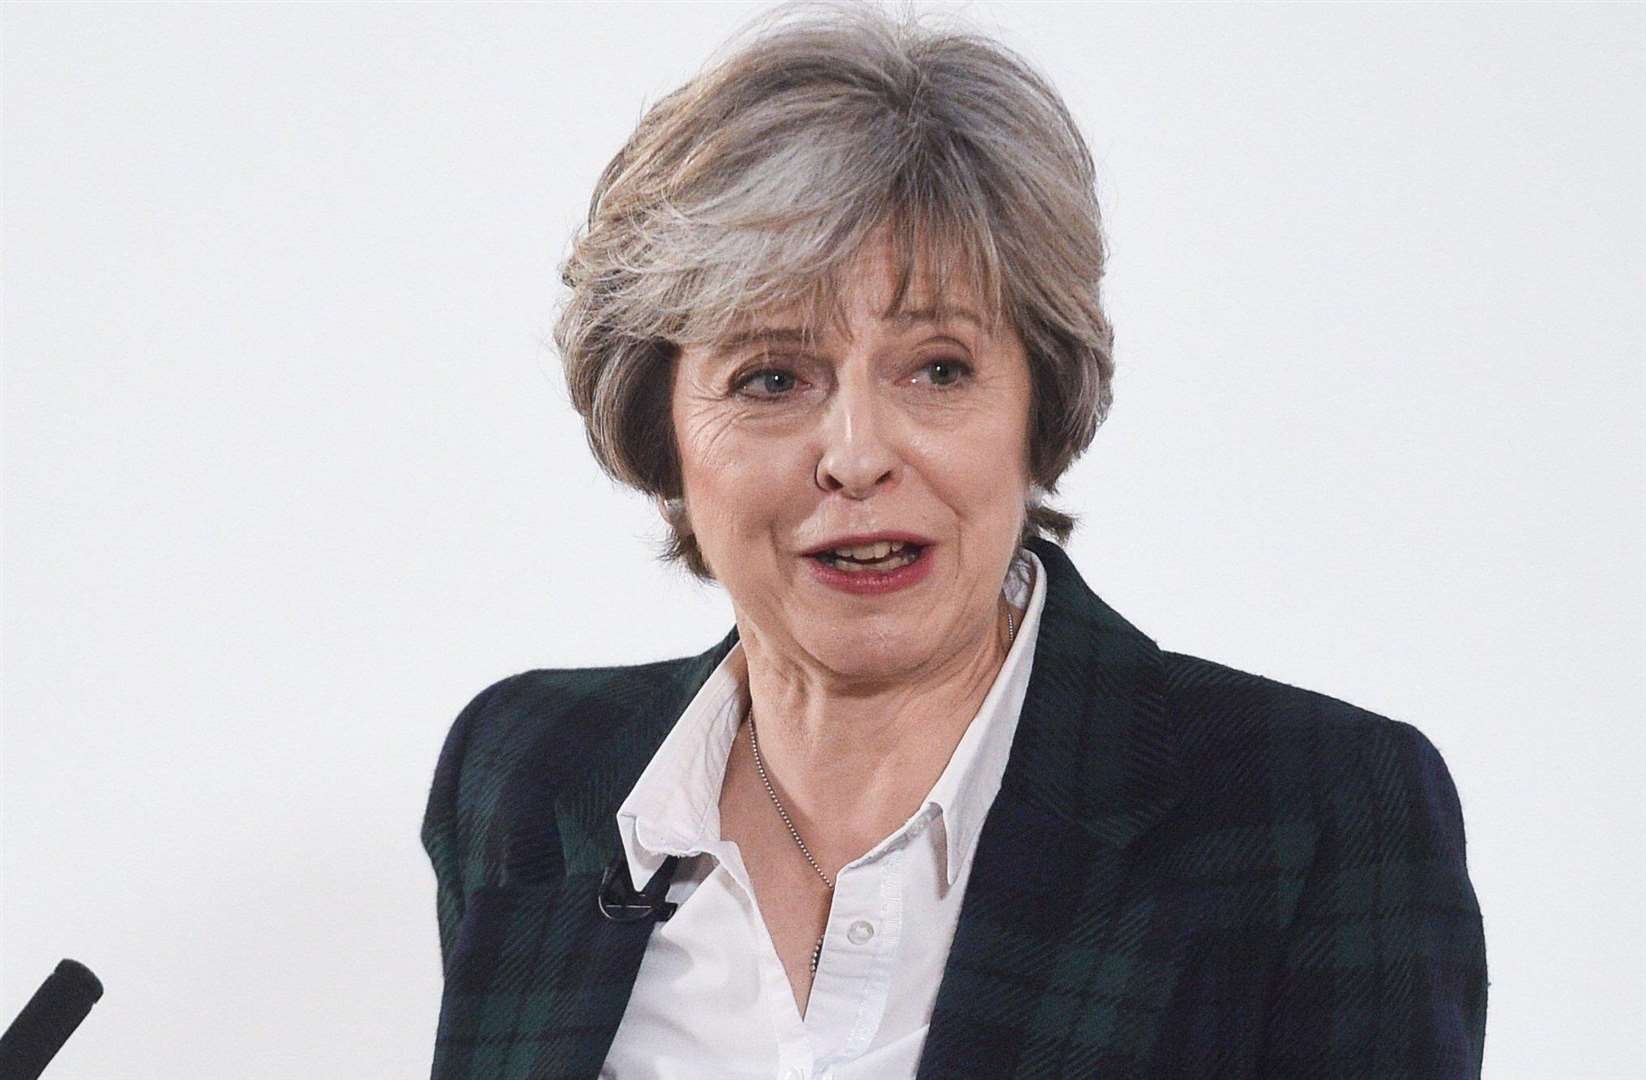 Prime Minister Theresa May has faced a leadership challenge